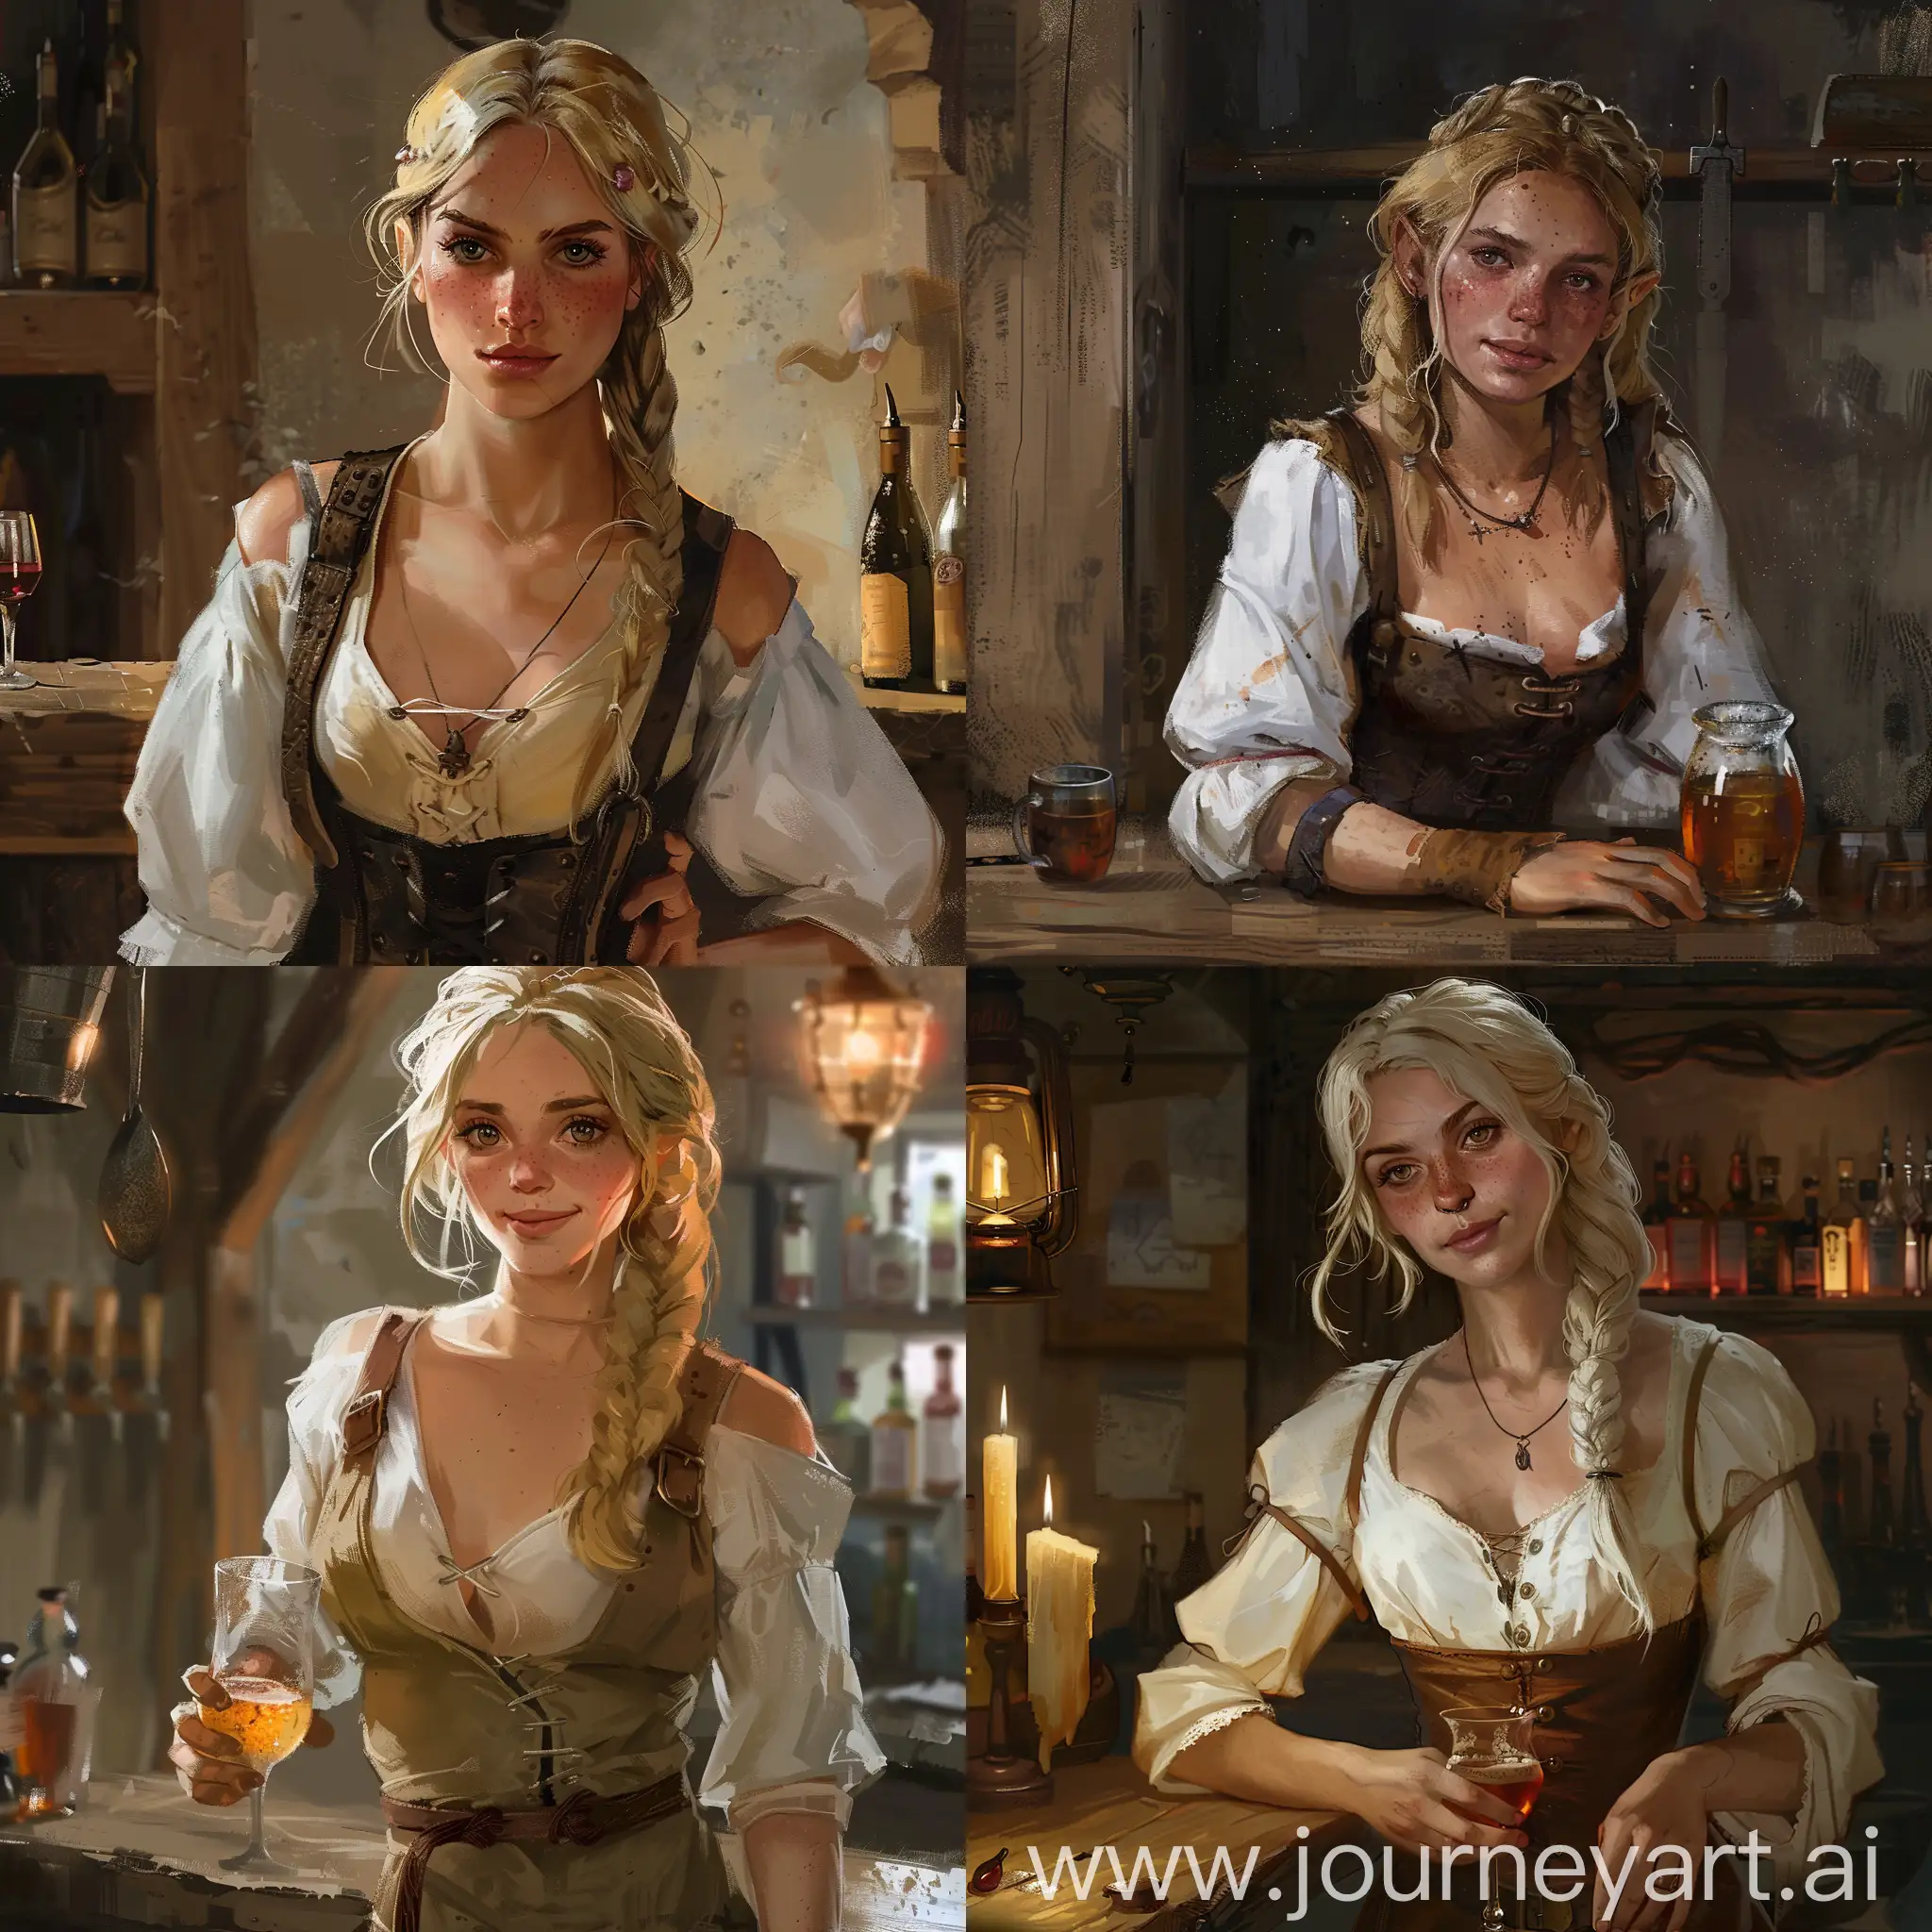 Medieval-Gnome-Barmaid-with-Blond-Hair-and-Freckles